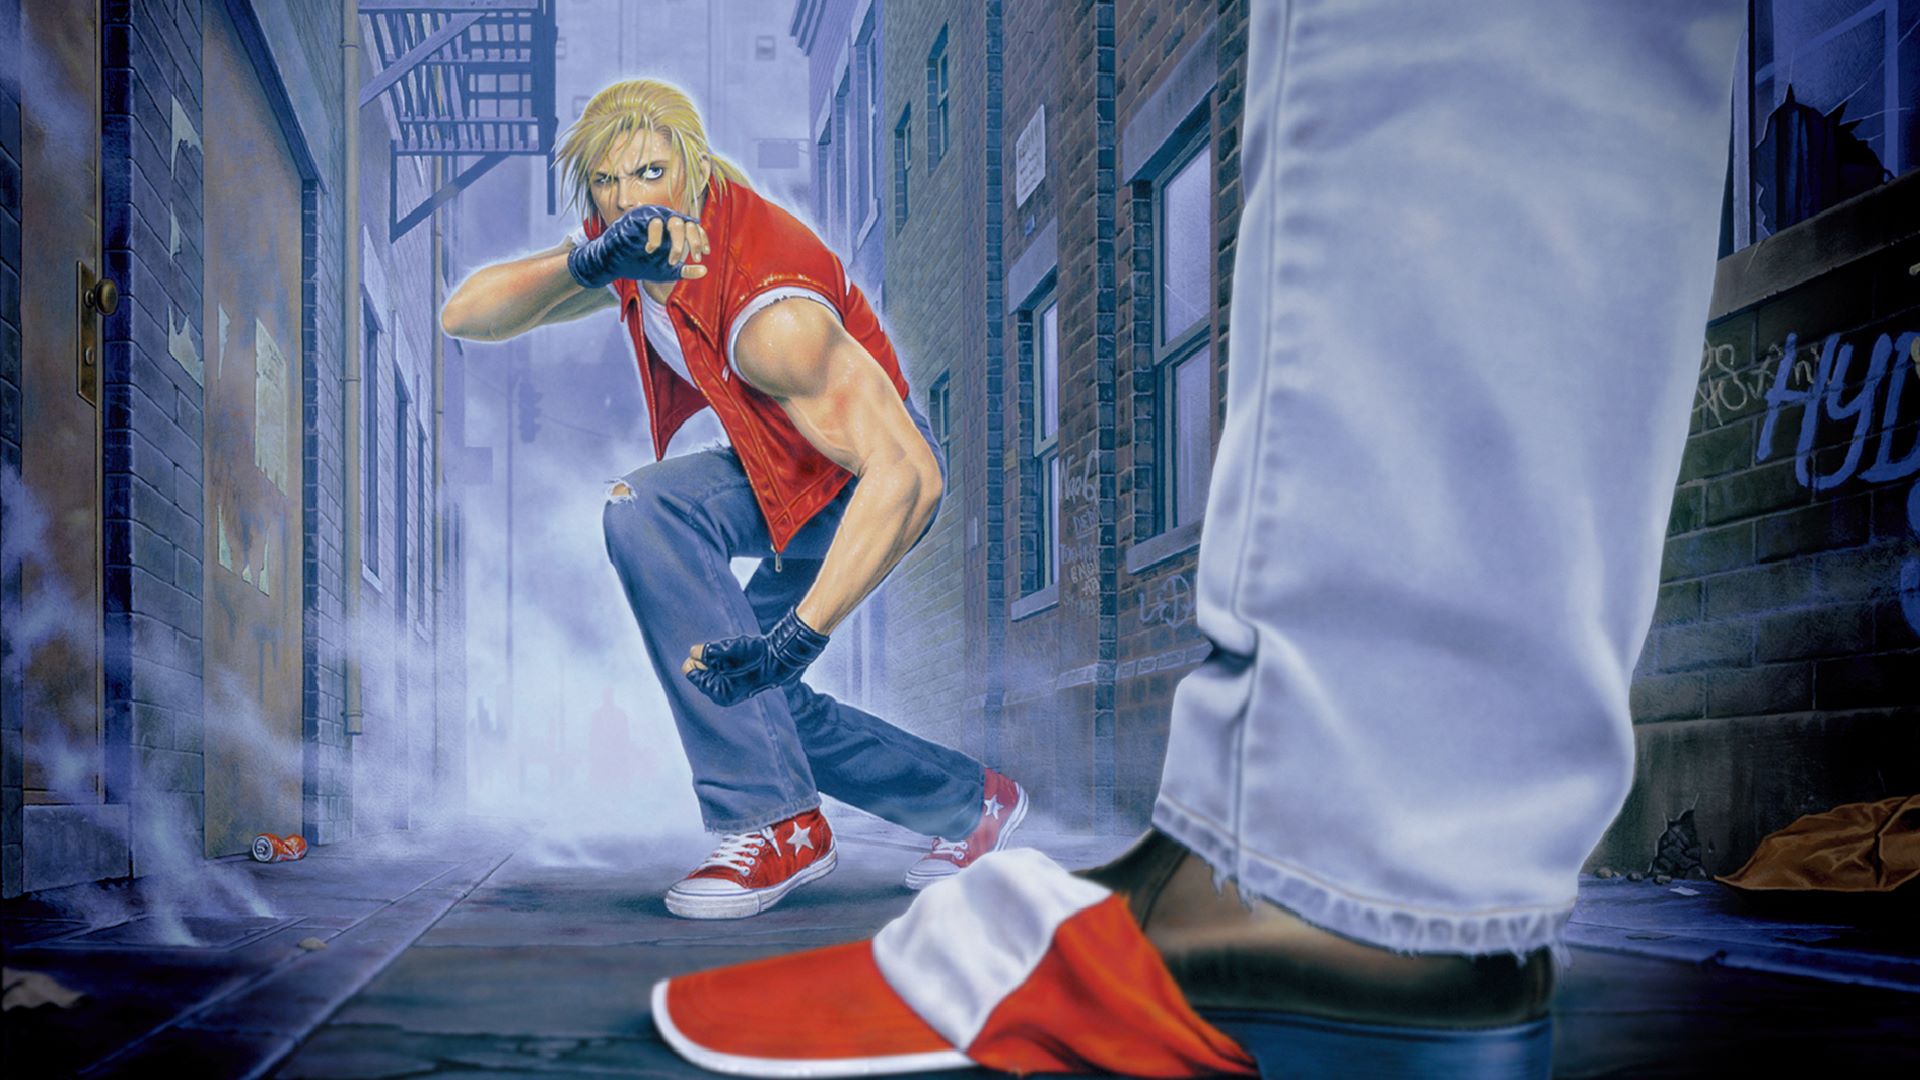 RB2: The Newcomers: Real Bout Fatal Fury 2